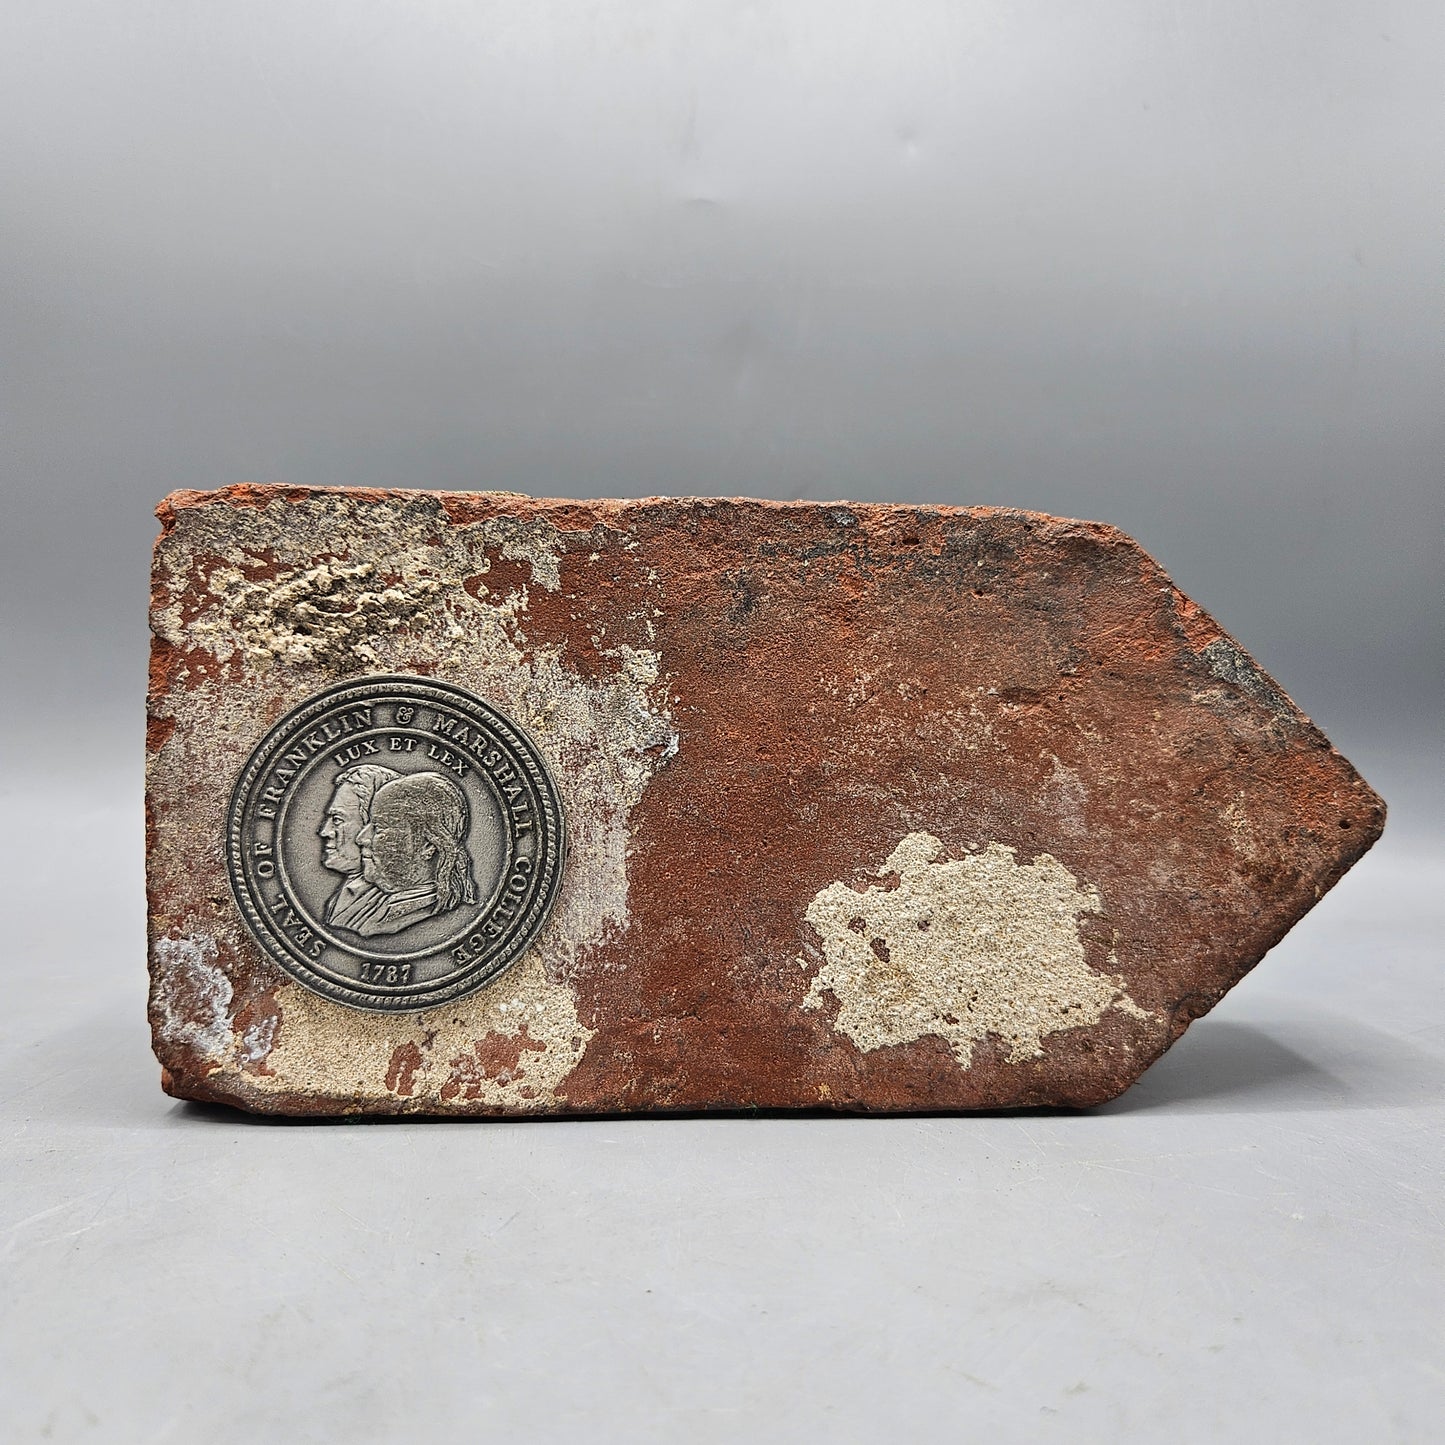 Vintage Franklin & Marshall College Medallion Coin Embedded In Real Brick